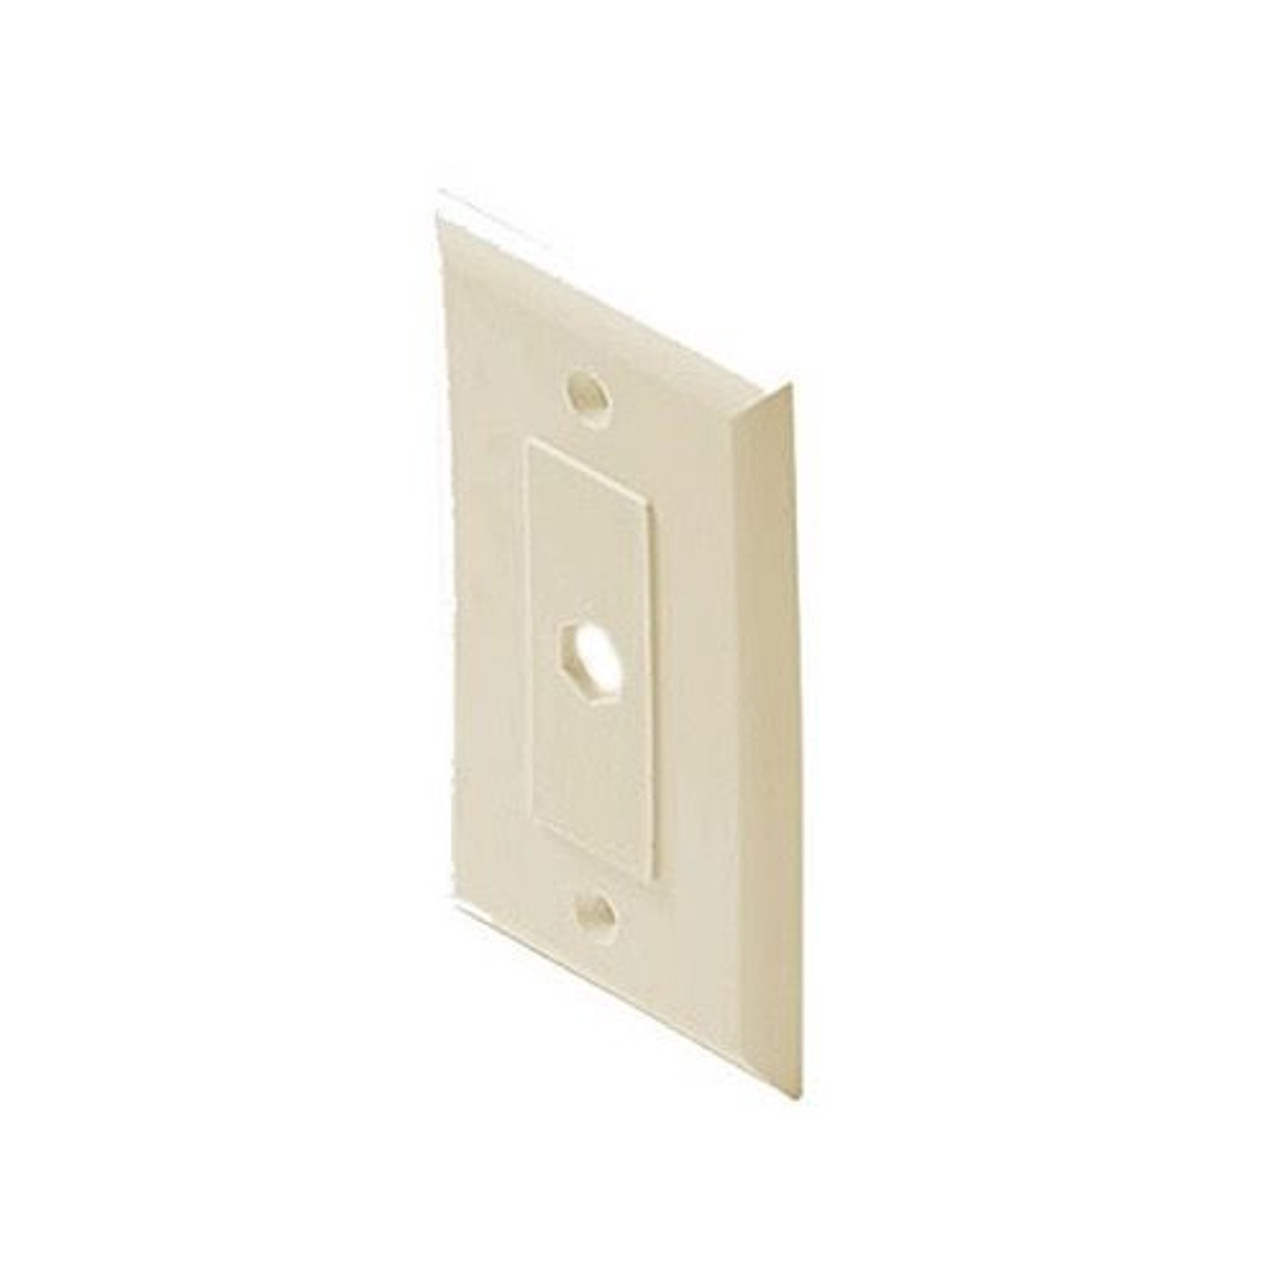 Steren 200-261IV Decorator Wall Plate Ivory 1 Hole Single Piece Hex Insert Single Gang Coaxial Pass Through Connector Device Cable Hole 75 Ohm Plug Connector Nylon Flush Mount Cover